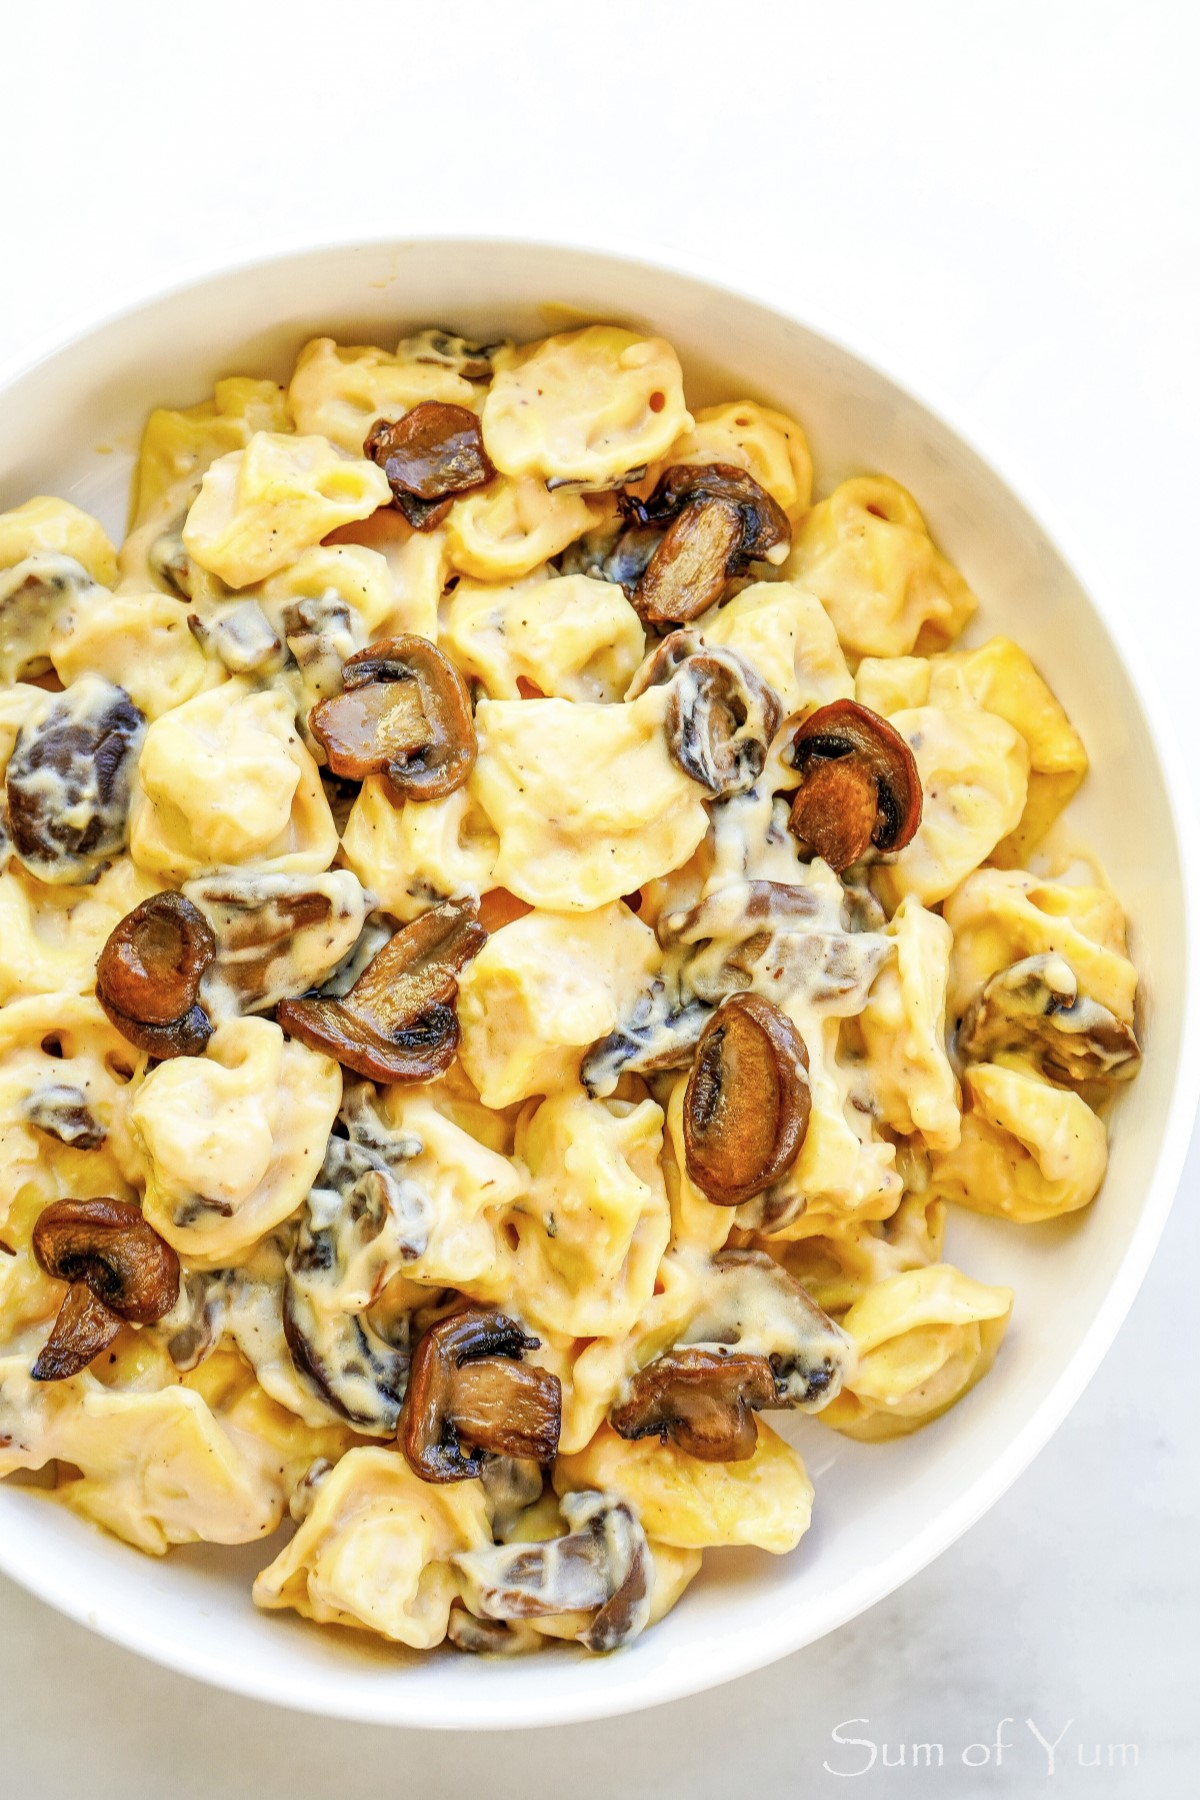 Creamy Mushroom Tortellini is mouthwateringly delicious! (2022)